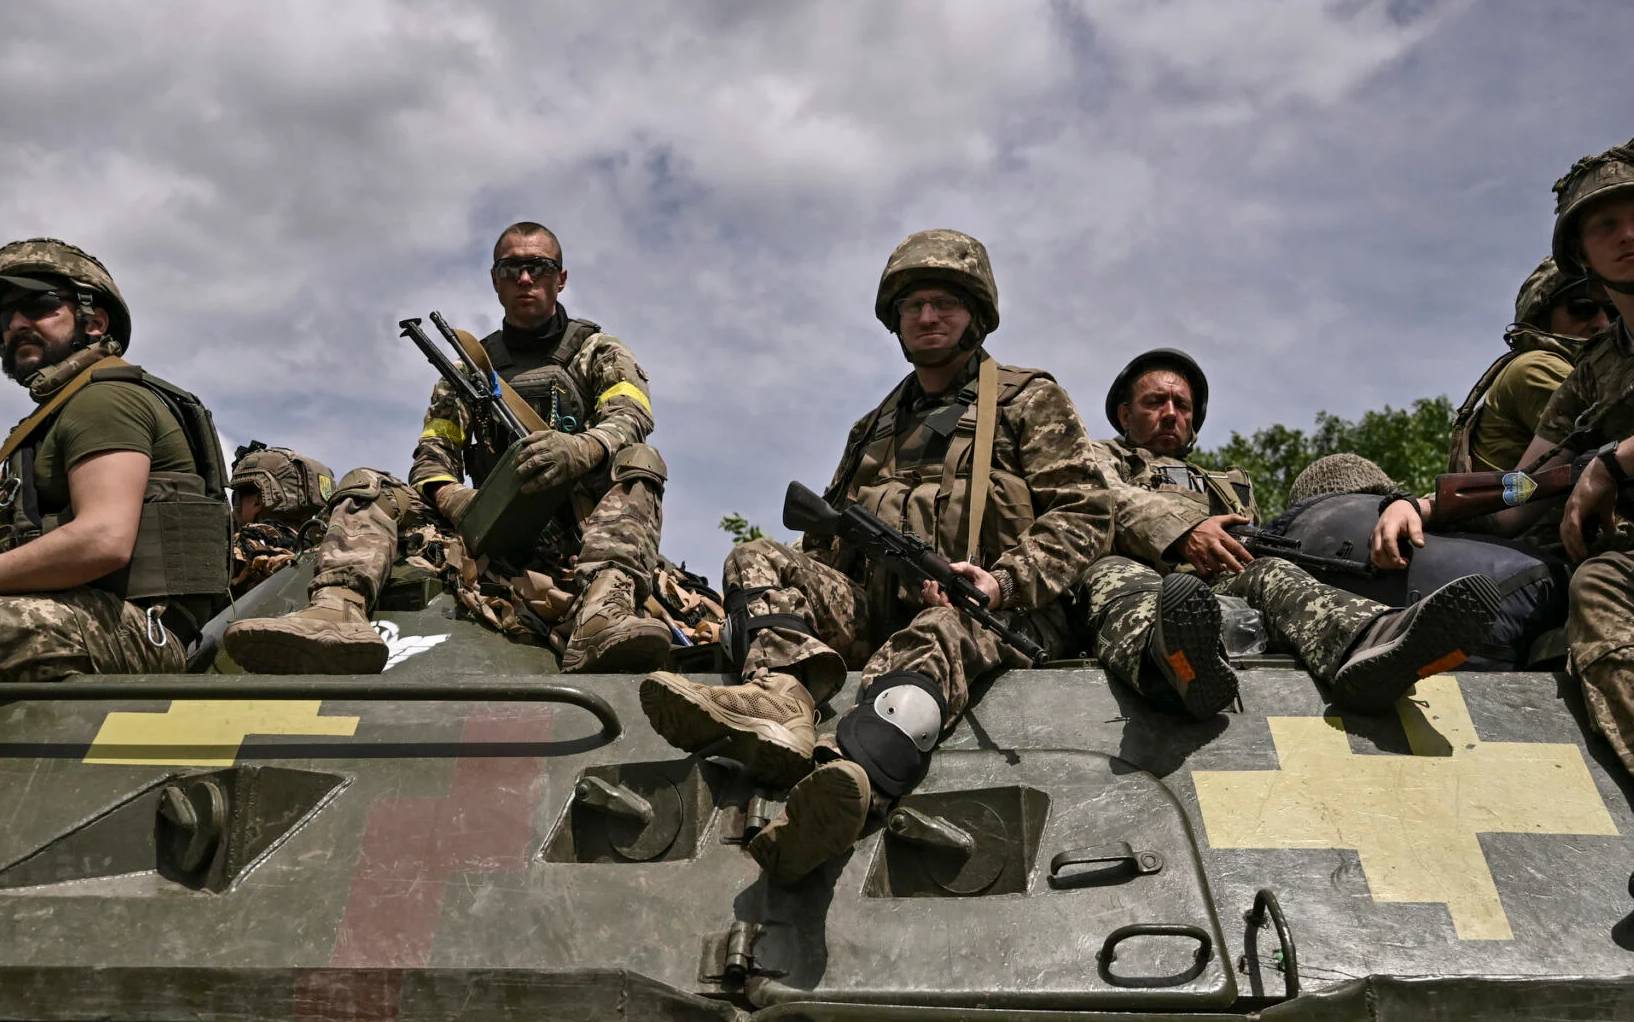 Ukrainian troops sit on an armoured vehicle as they move back from the front line near the city of Sloviansk in the eastern Ukrainian region of Donbas on June 1, 2022. (Photo by ARIS MESSINIS / AFP)